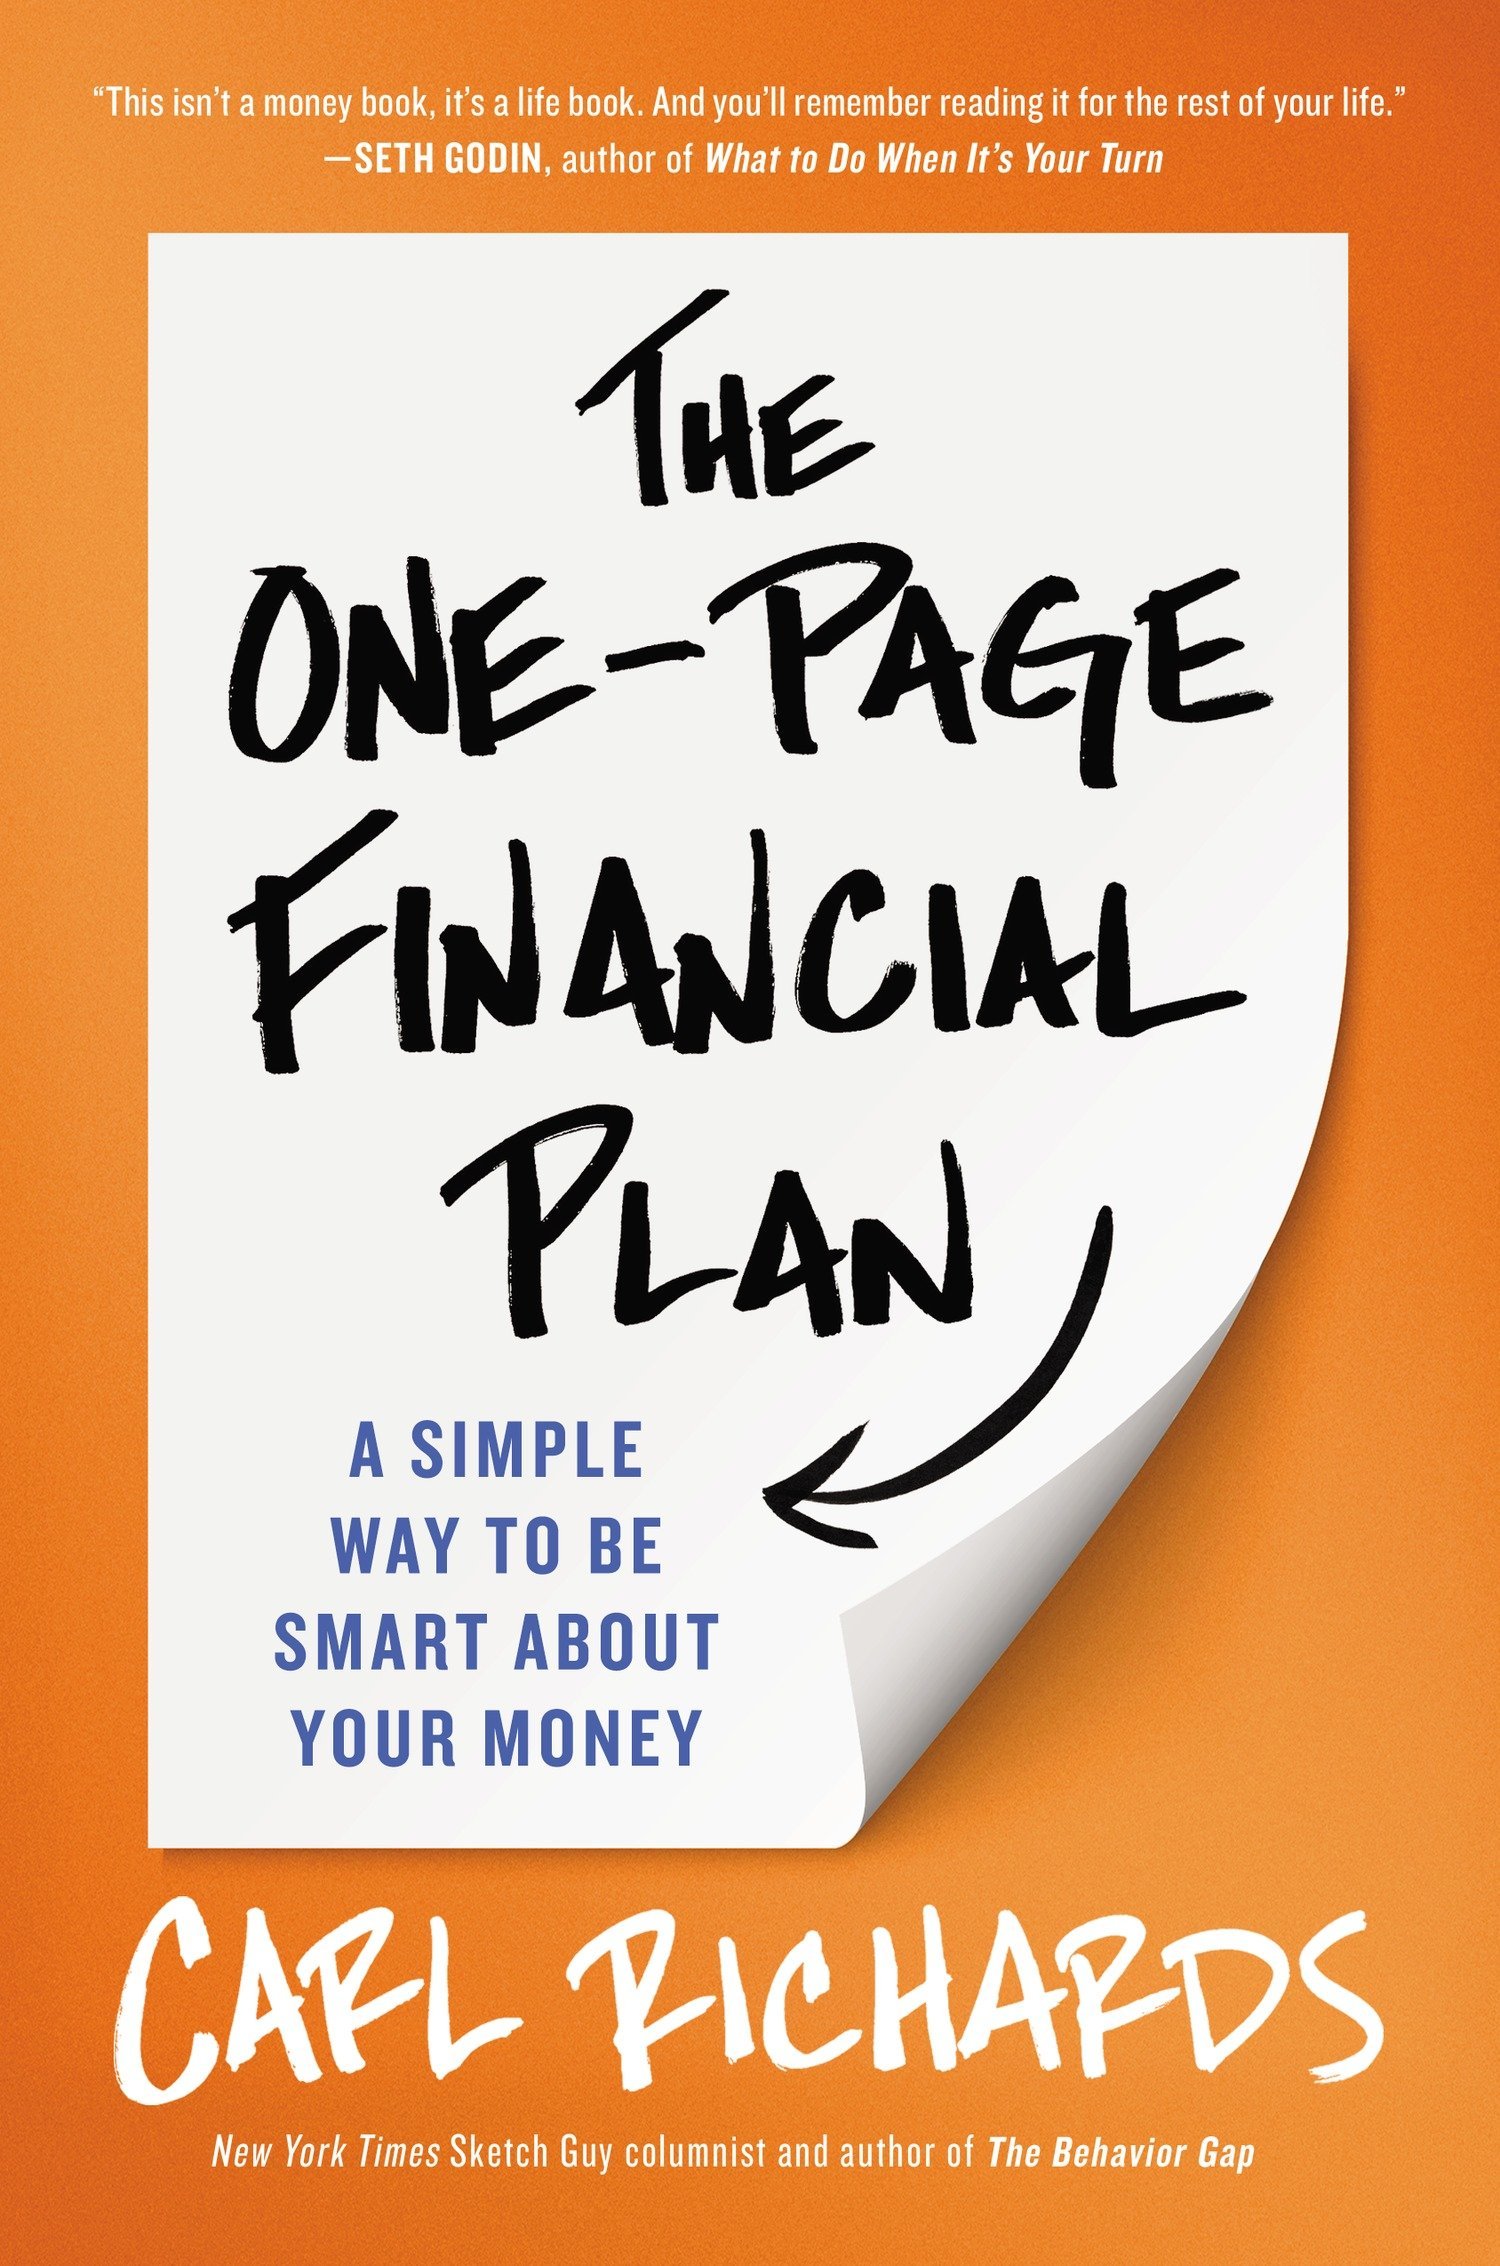 The One-Page Financial Plan